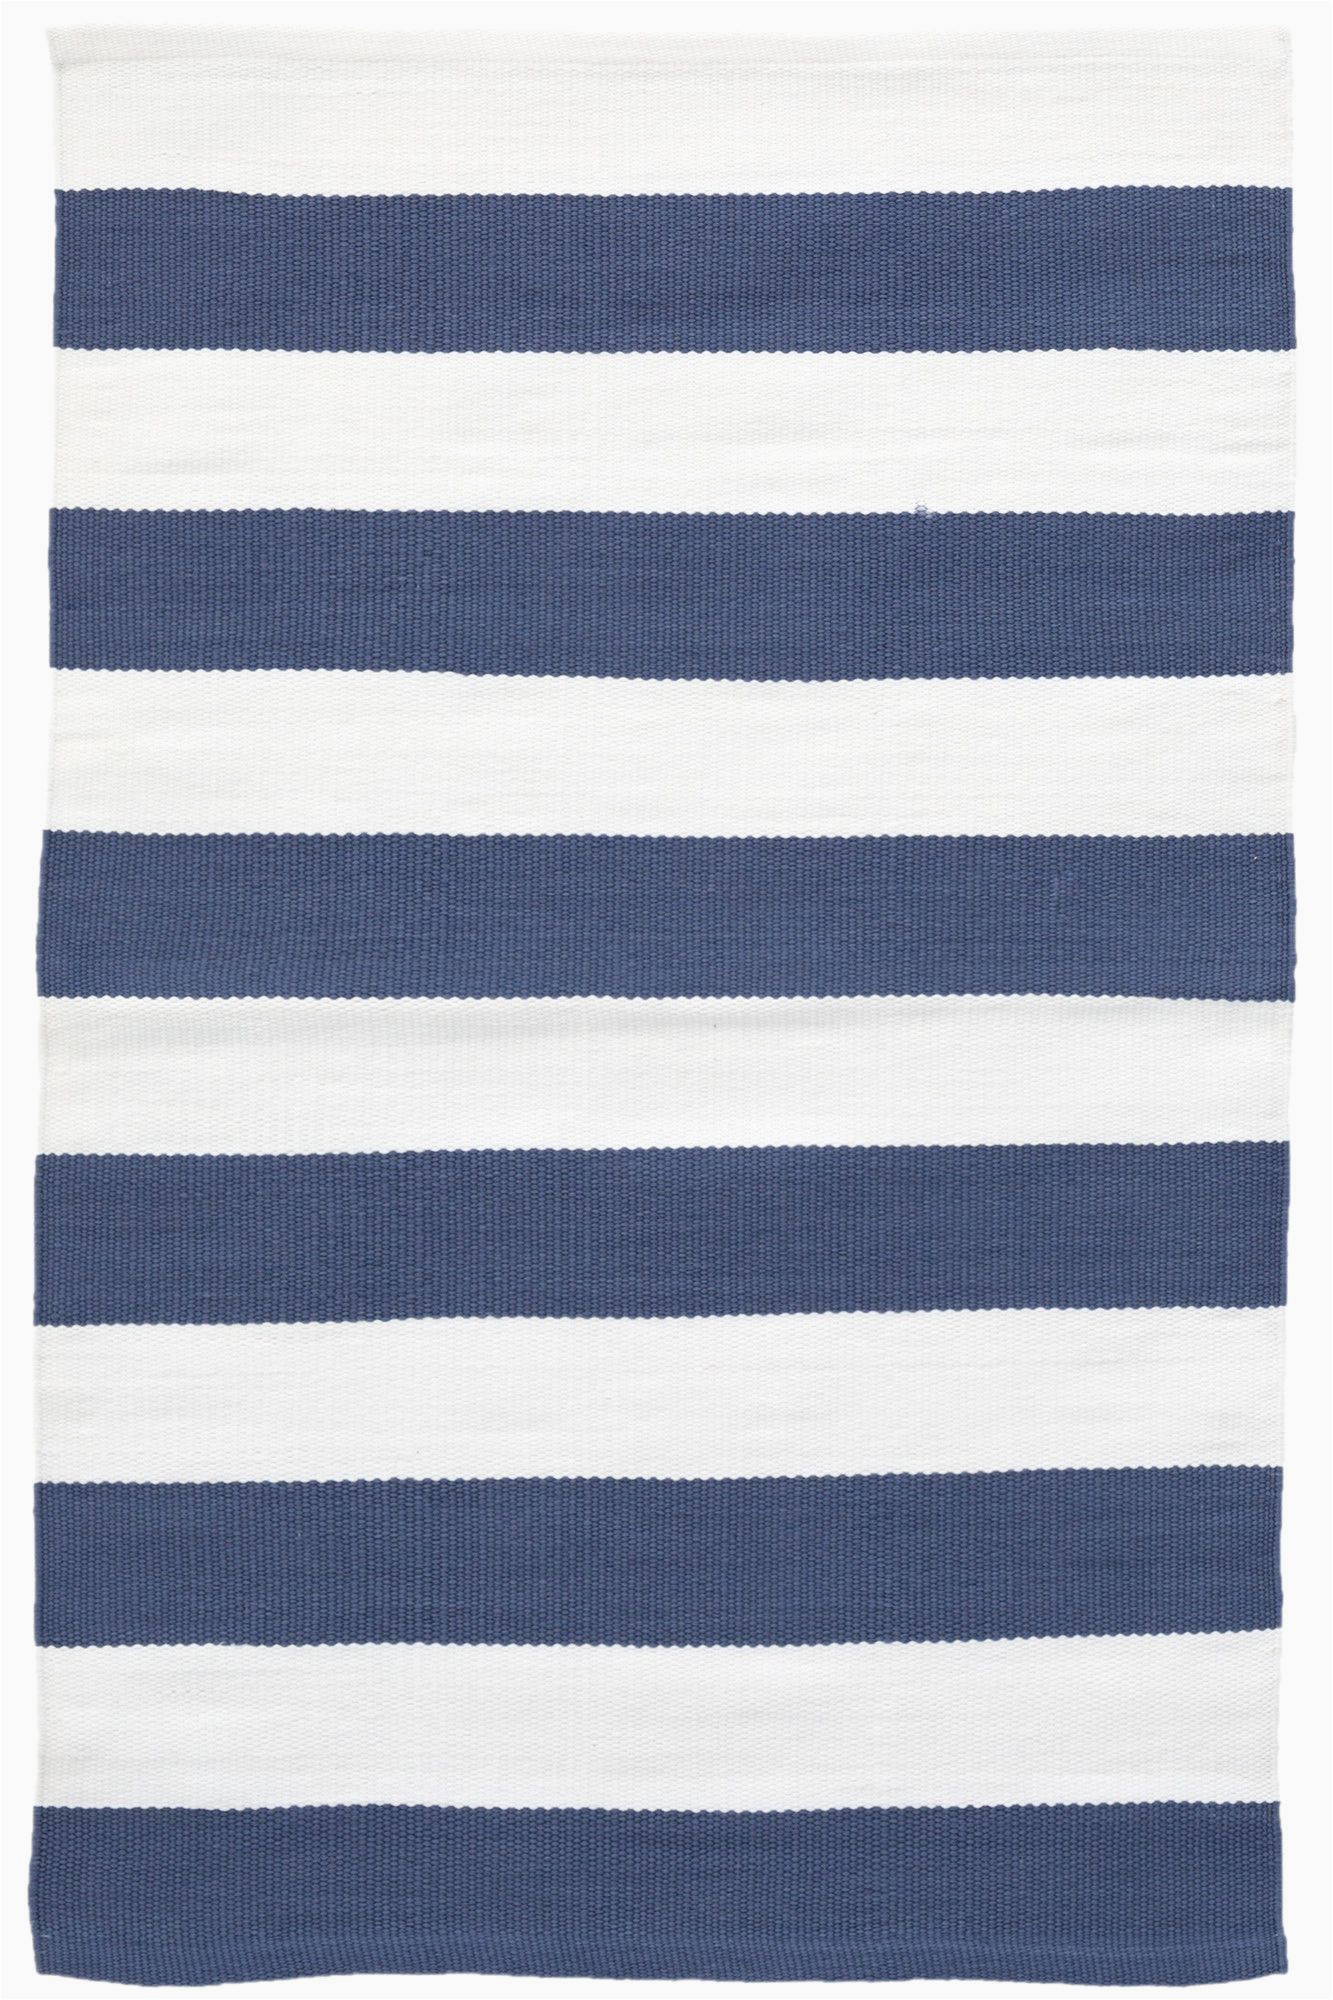 Outdoor Blue and White Rug Catamaran Striped Blue White Indoor Outdoor area Rug